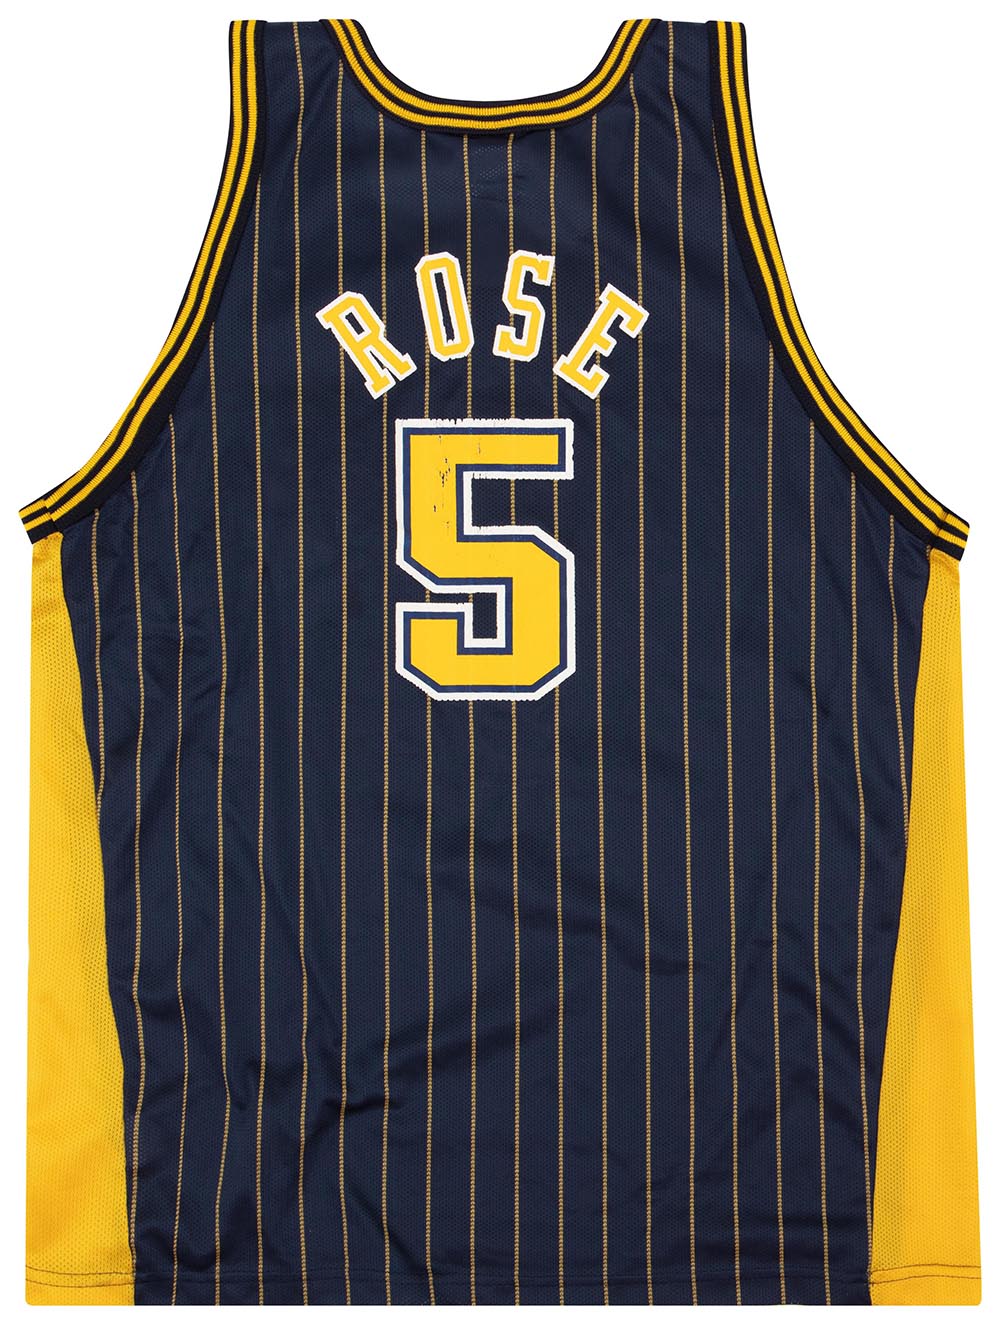 Official Indiana Pacers Throwback Jerseys, Retro Jersey